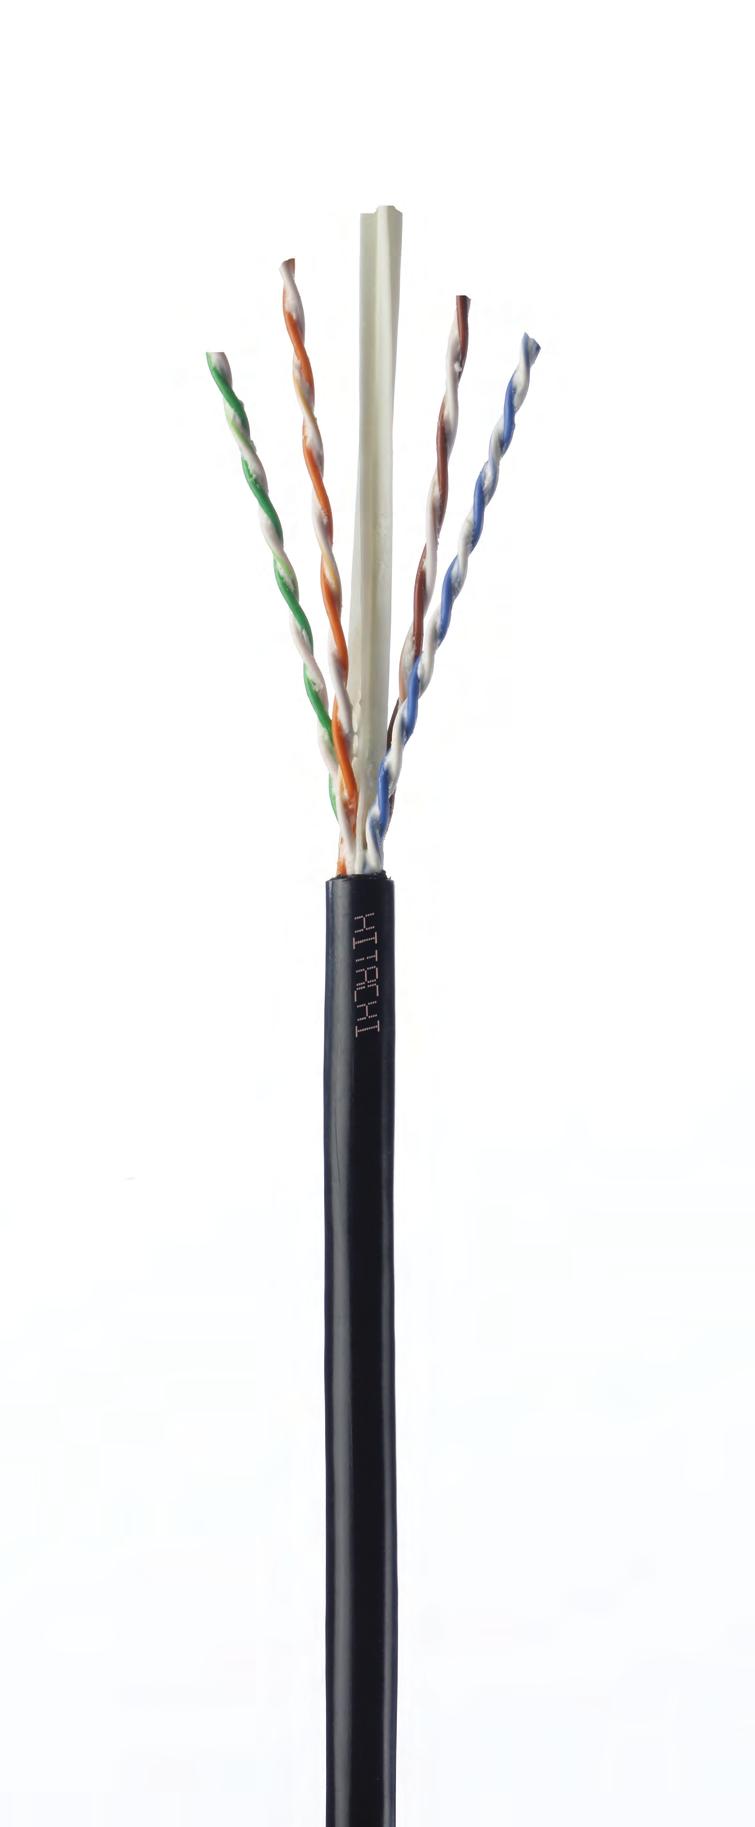 Outdoor Cable Special Applications Electrical Characteristics Input impedance Maximum resistance unbalance 5% 100 ± 15 Ω (1.